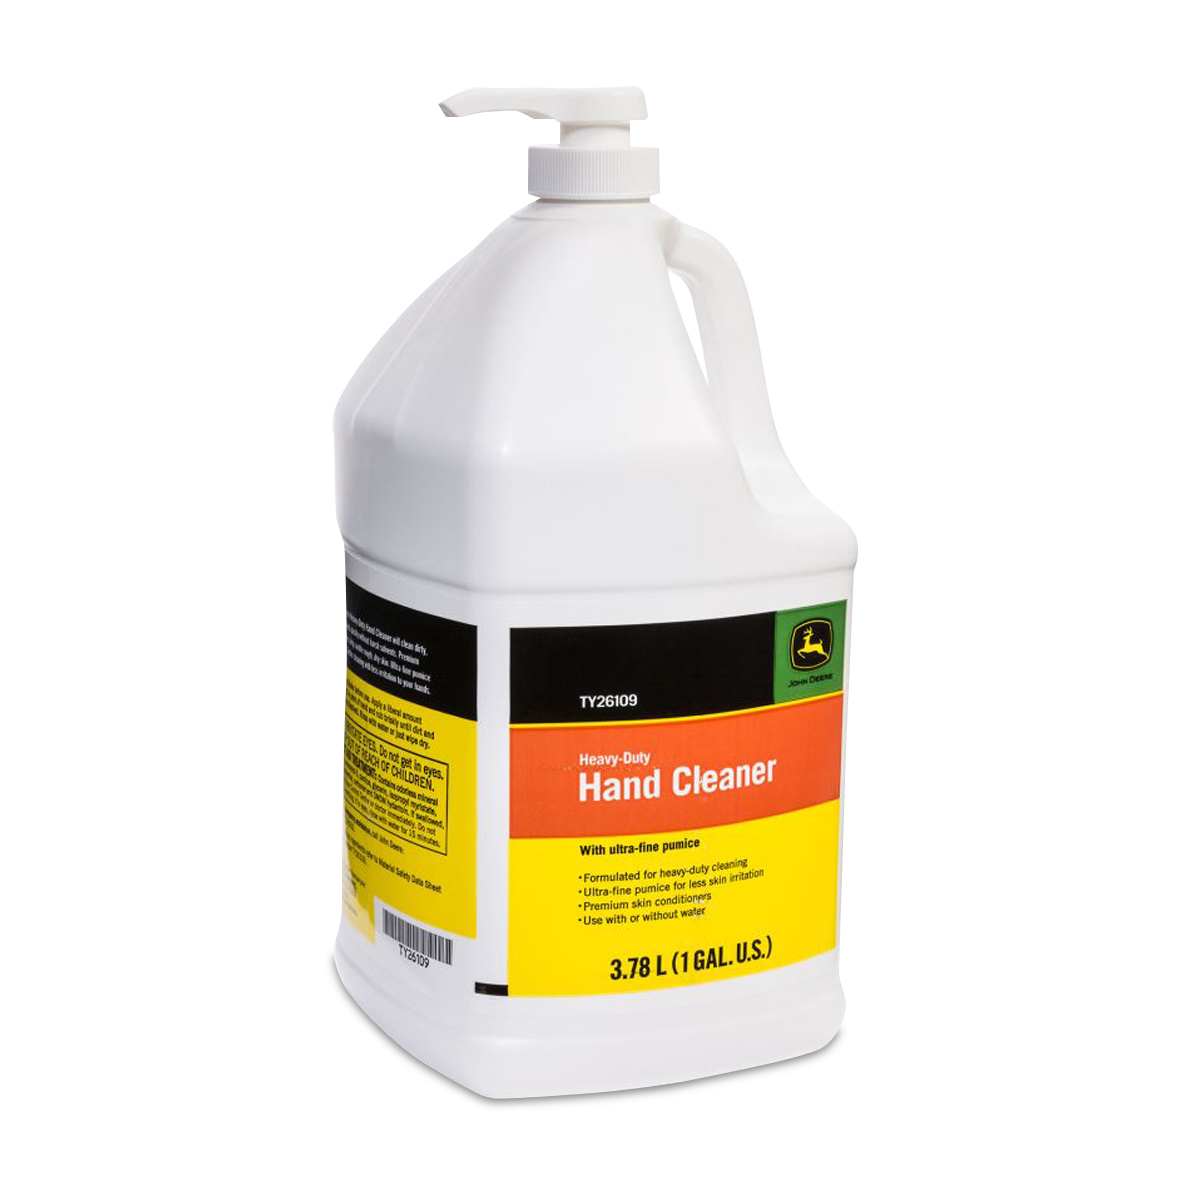 Heavy Duty Hand Cleaner with Pumice, 1 Gallon